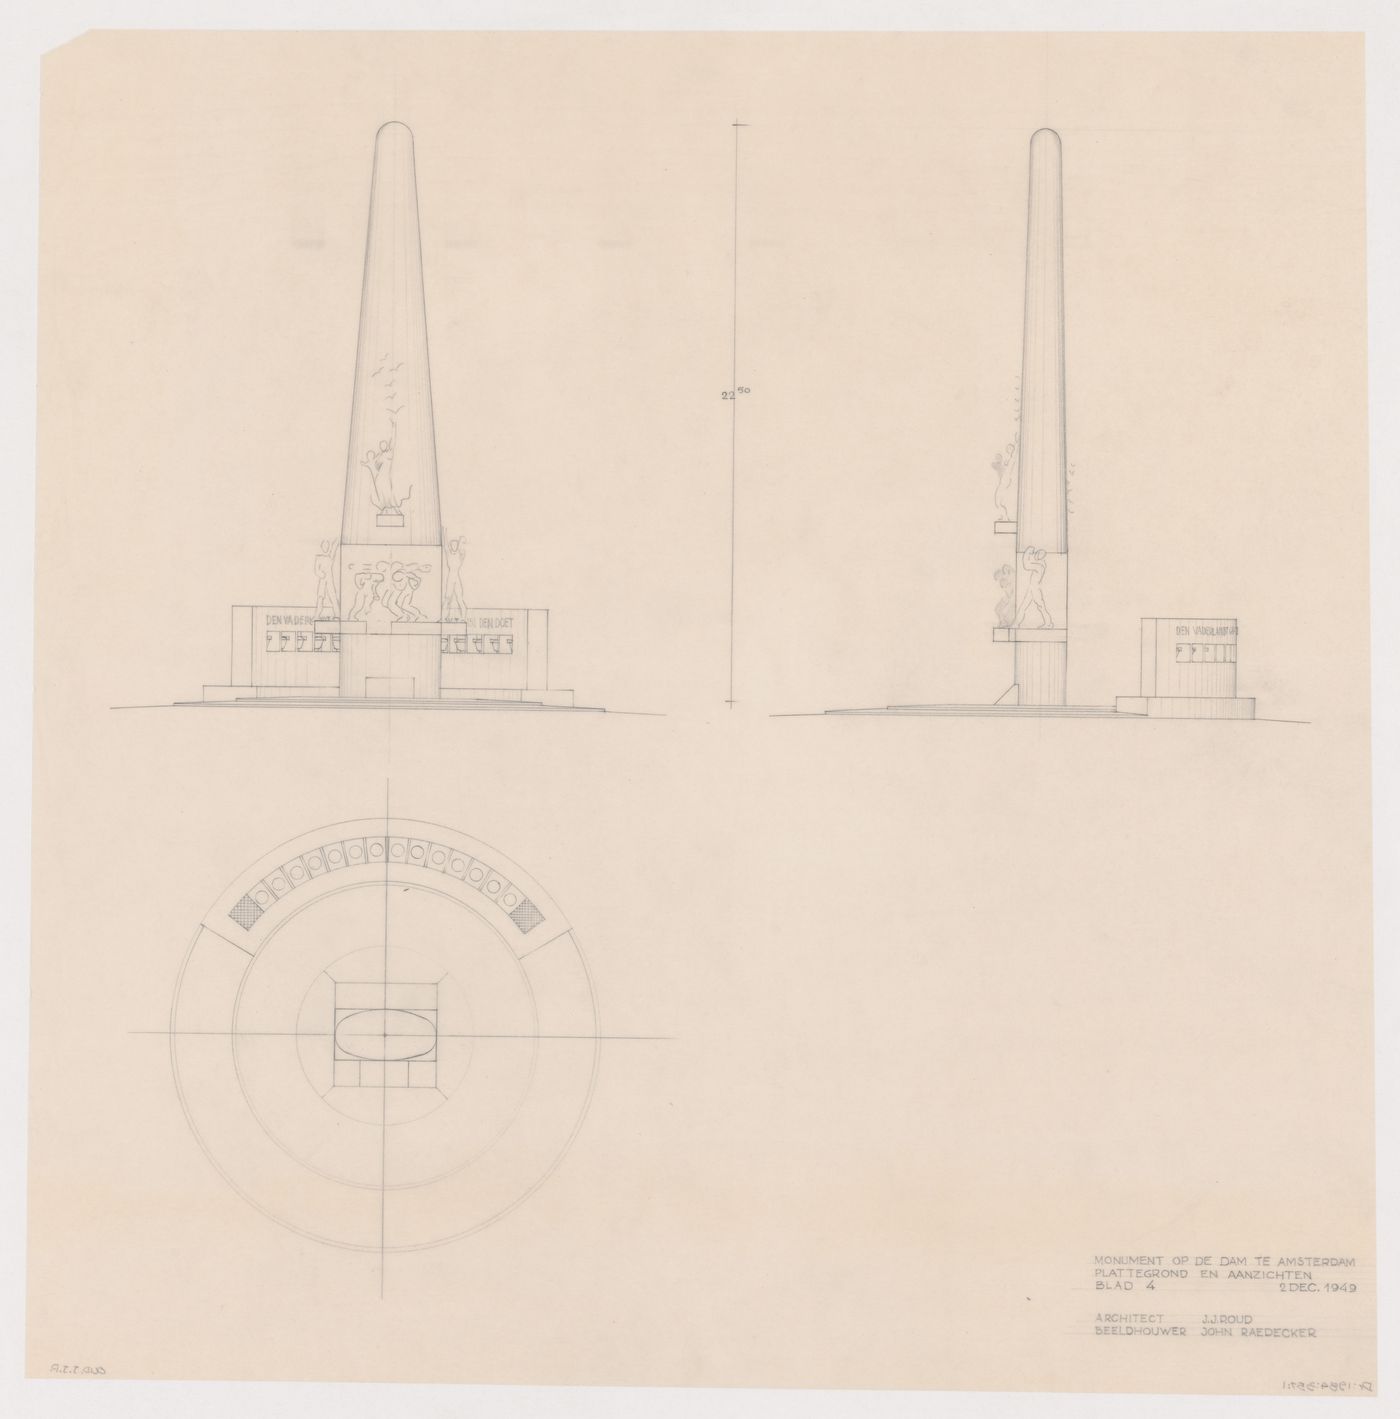 Elevations and plan for the National Monument showing sculptures by Johannes Anton Rädecker and Johan Rädecker, Dam Square, Amsterdam, Netherlands